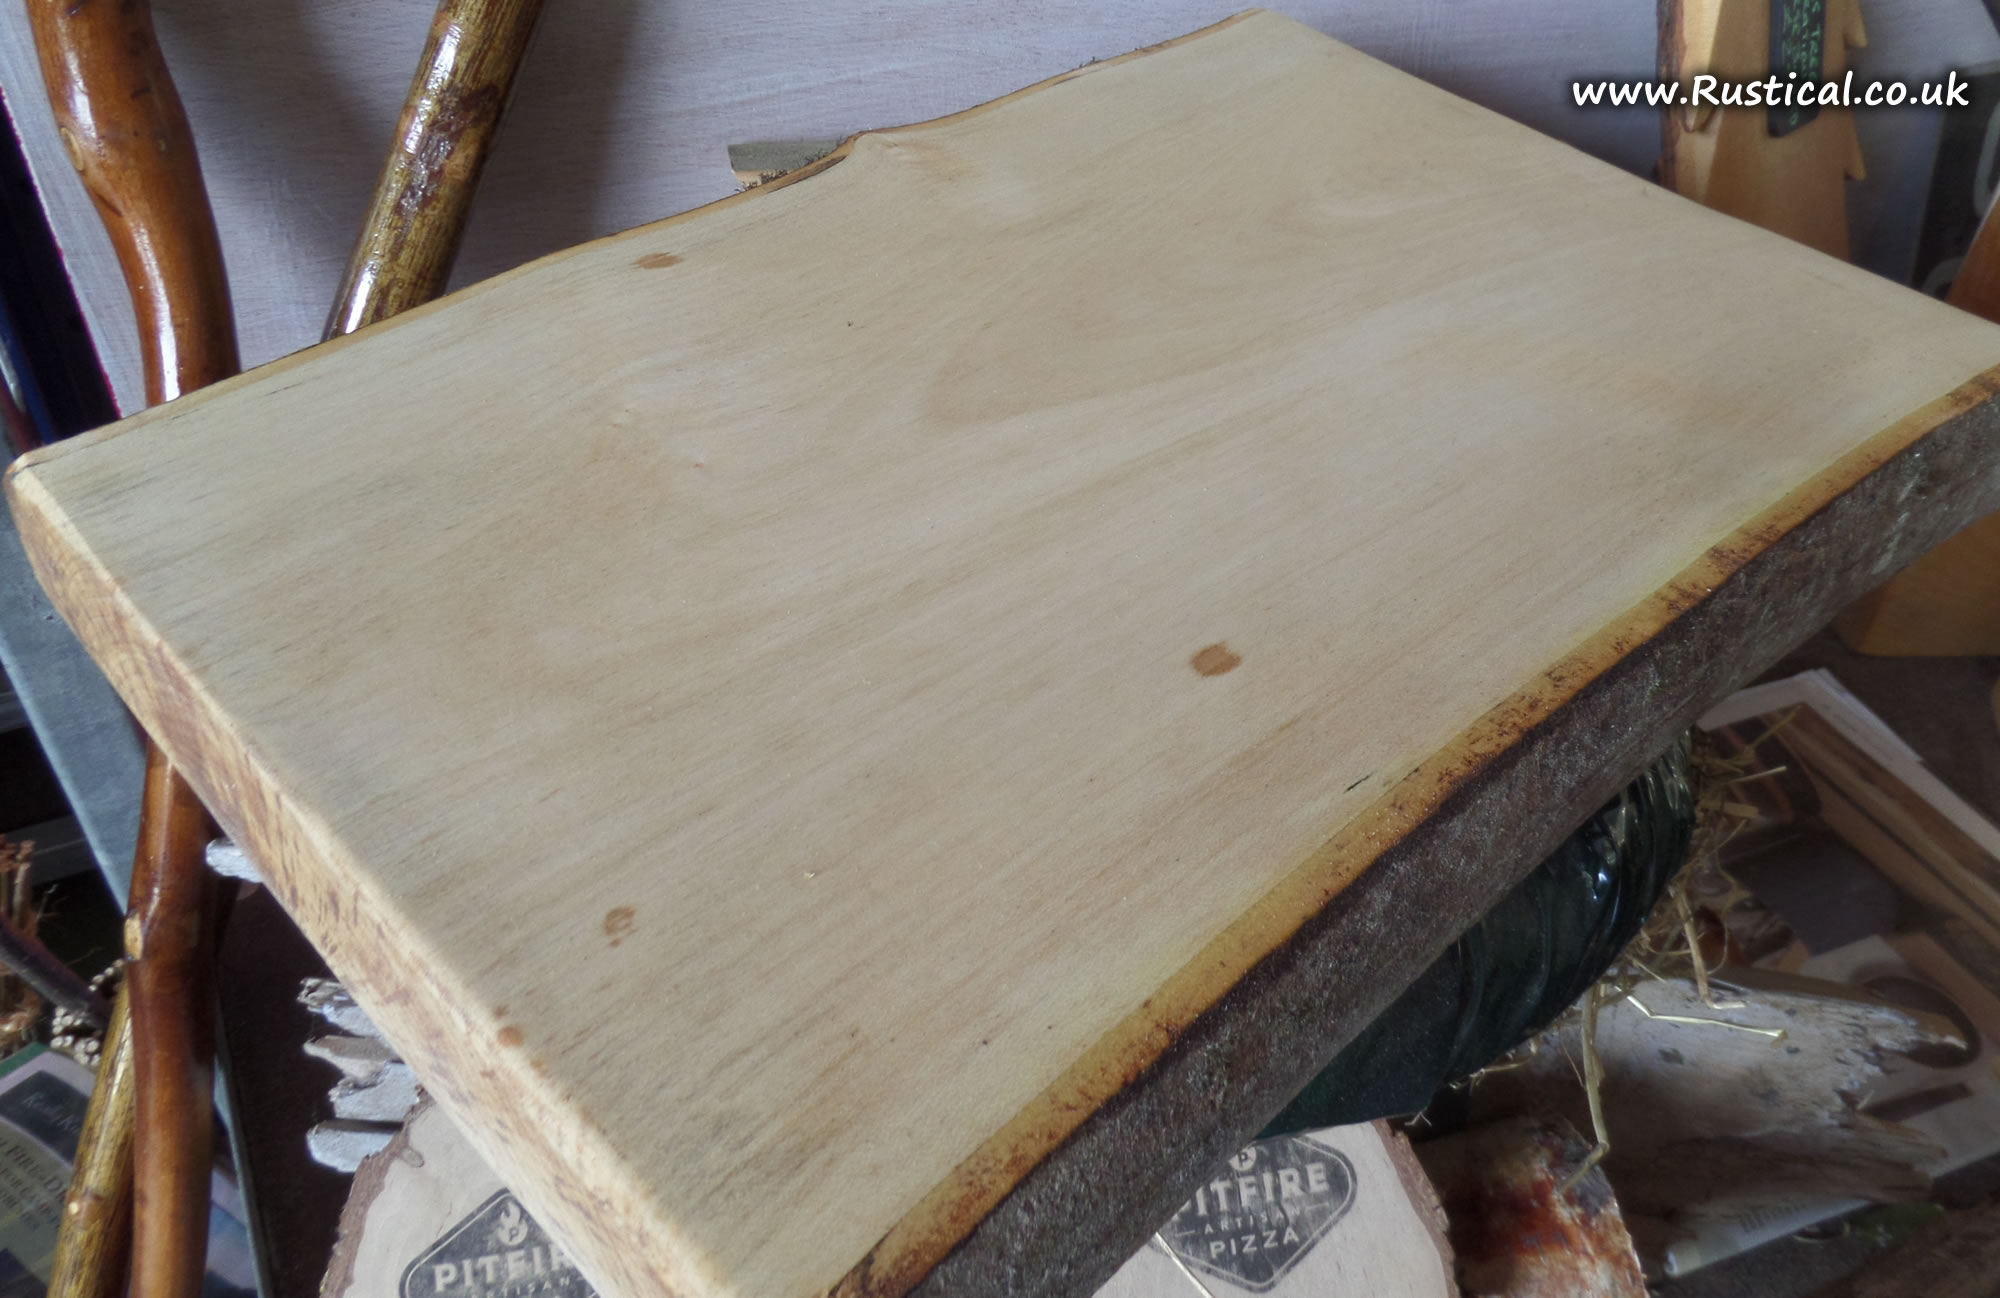 Large sycamore board gets its first oiling after sanding